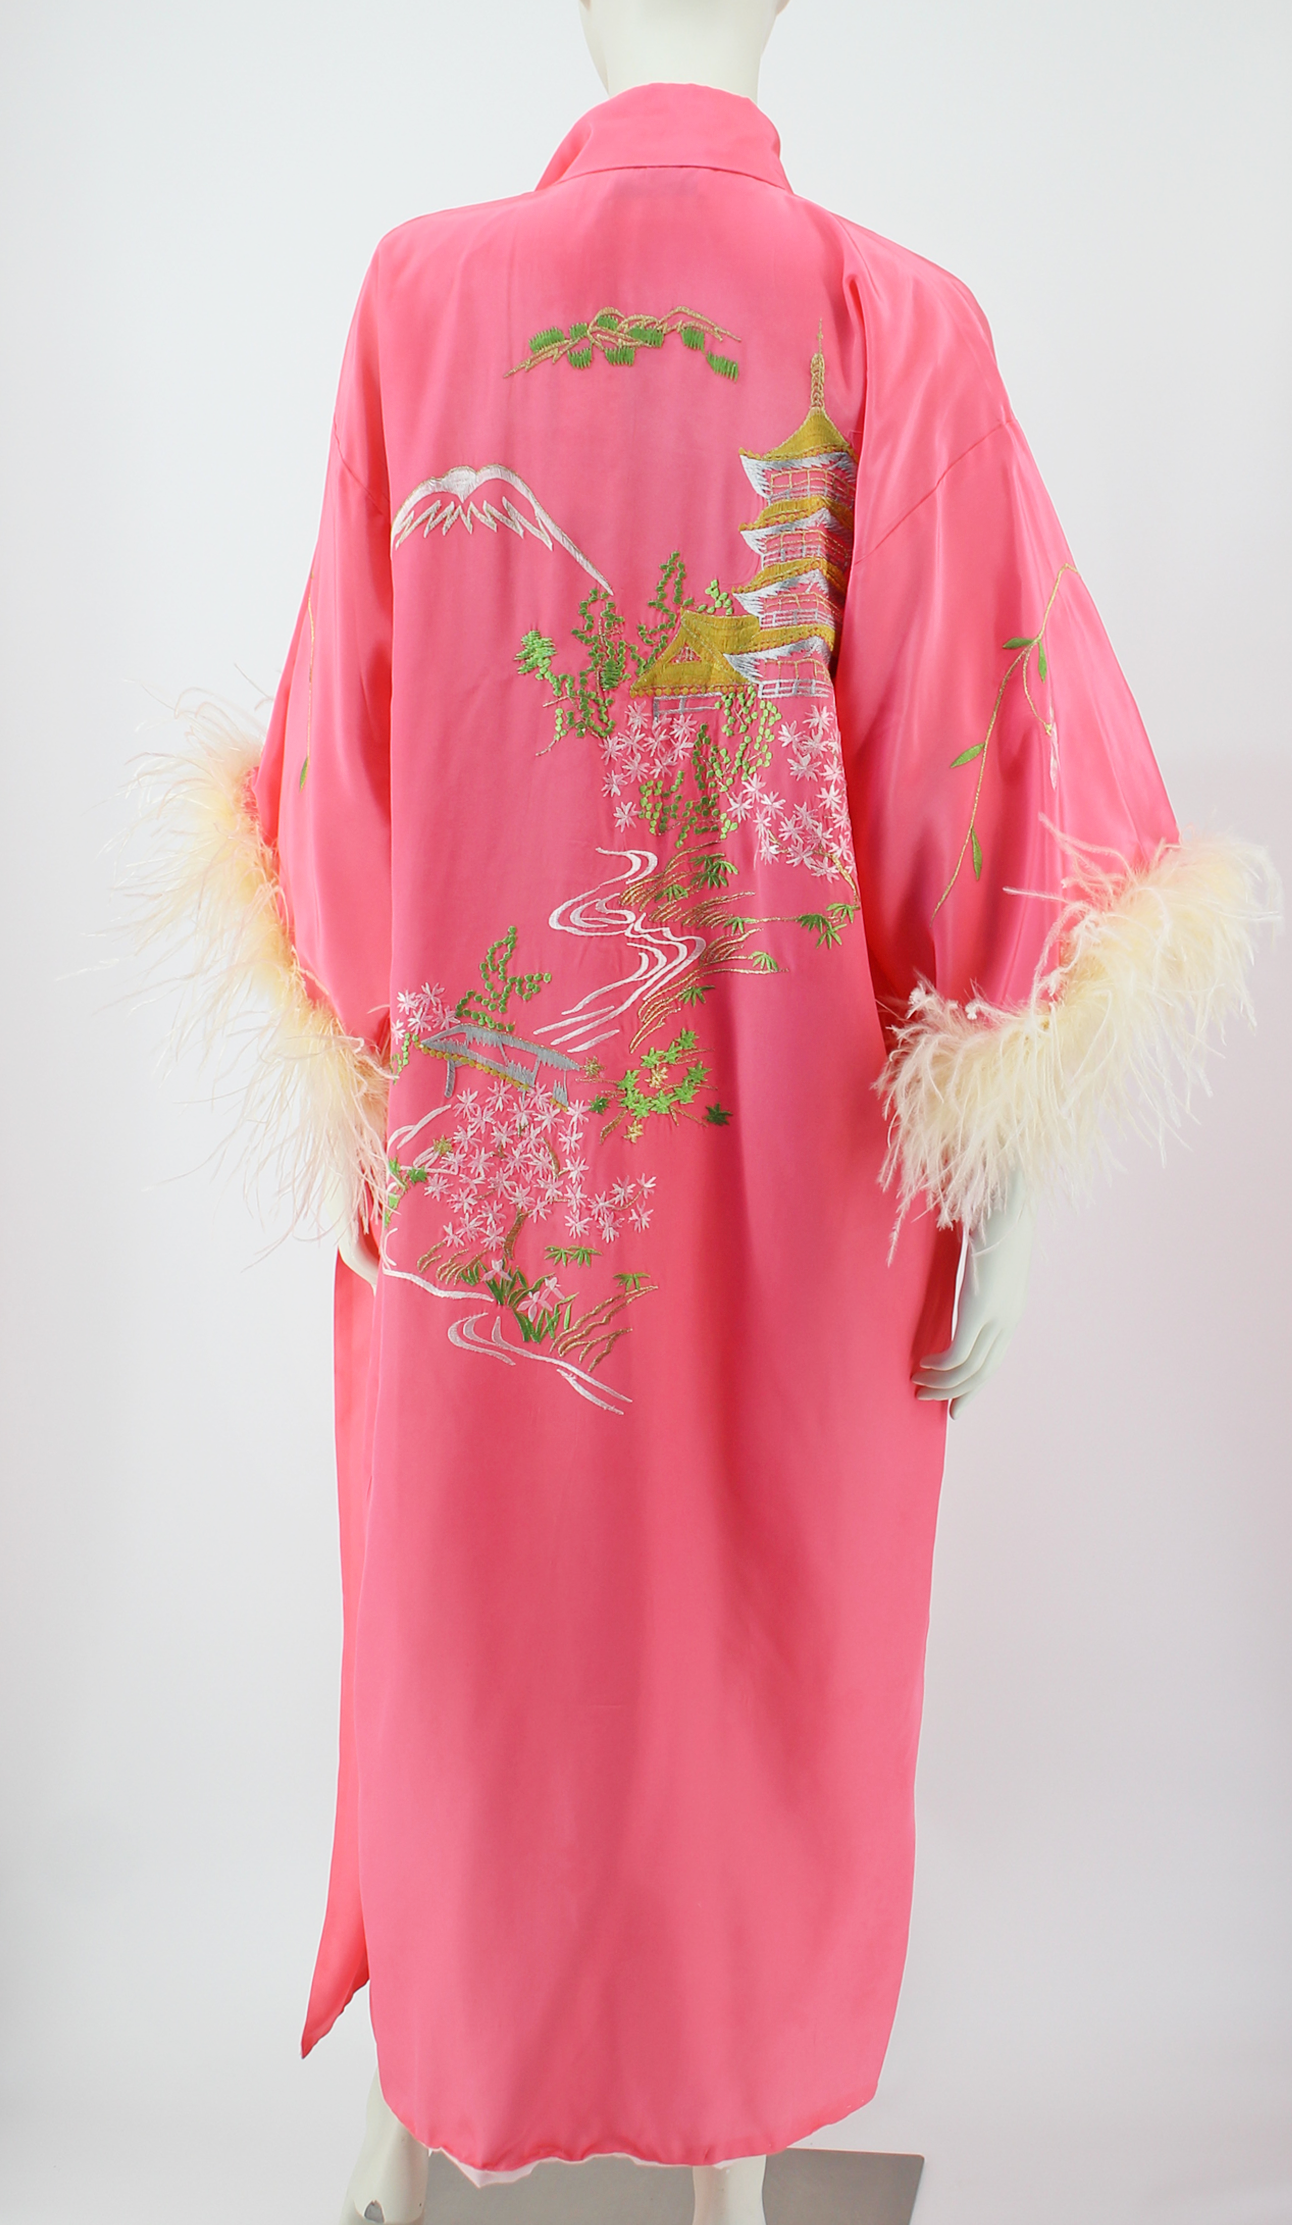 Dauphinette 1960s Pink Hand-Embroidered Robe with Feathers